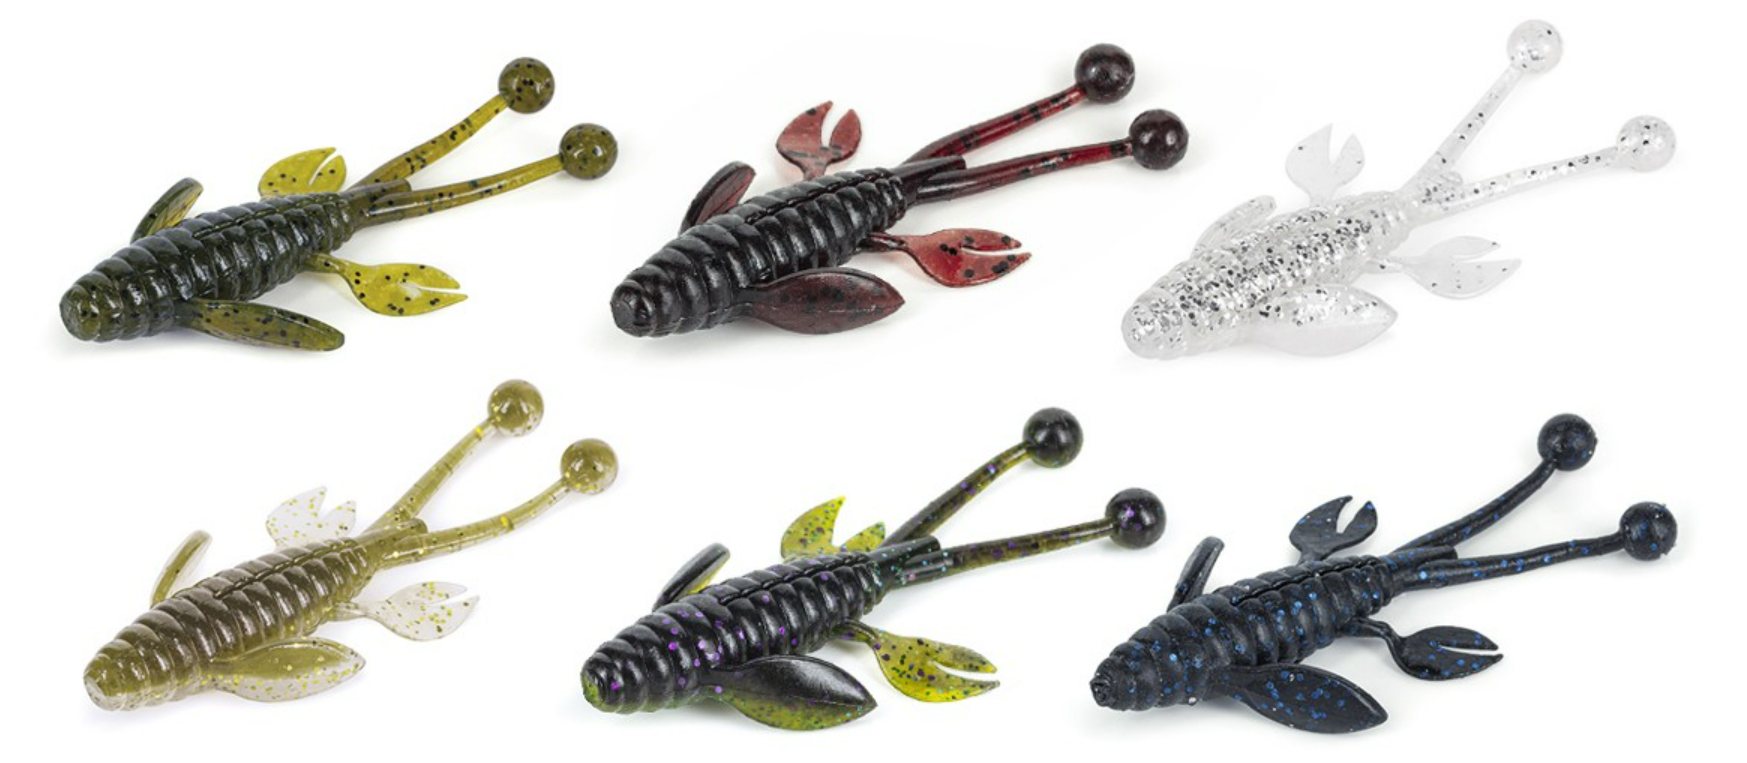 Molix Freaky Flex 3 '' Col. Mixed Pack 5 - Creature Soft Bait